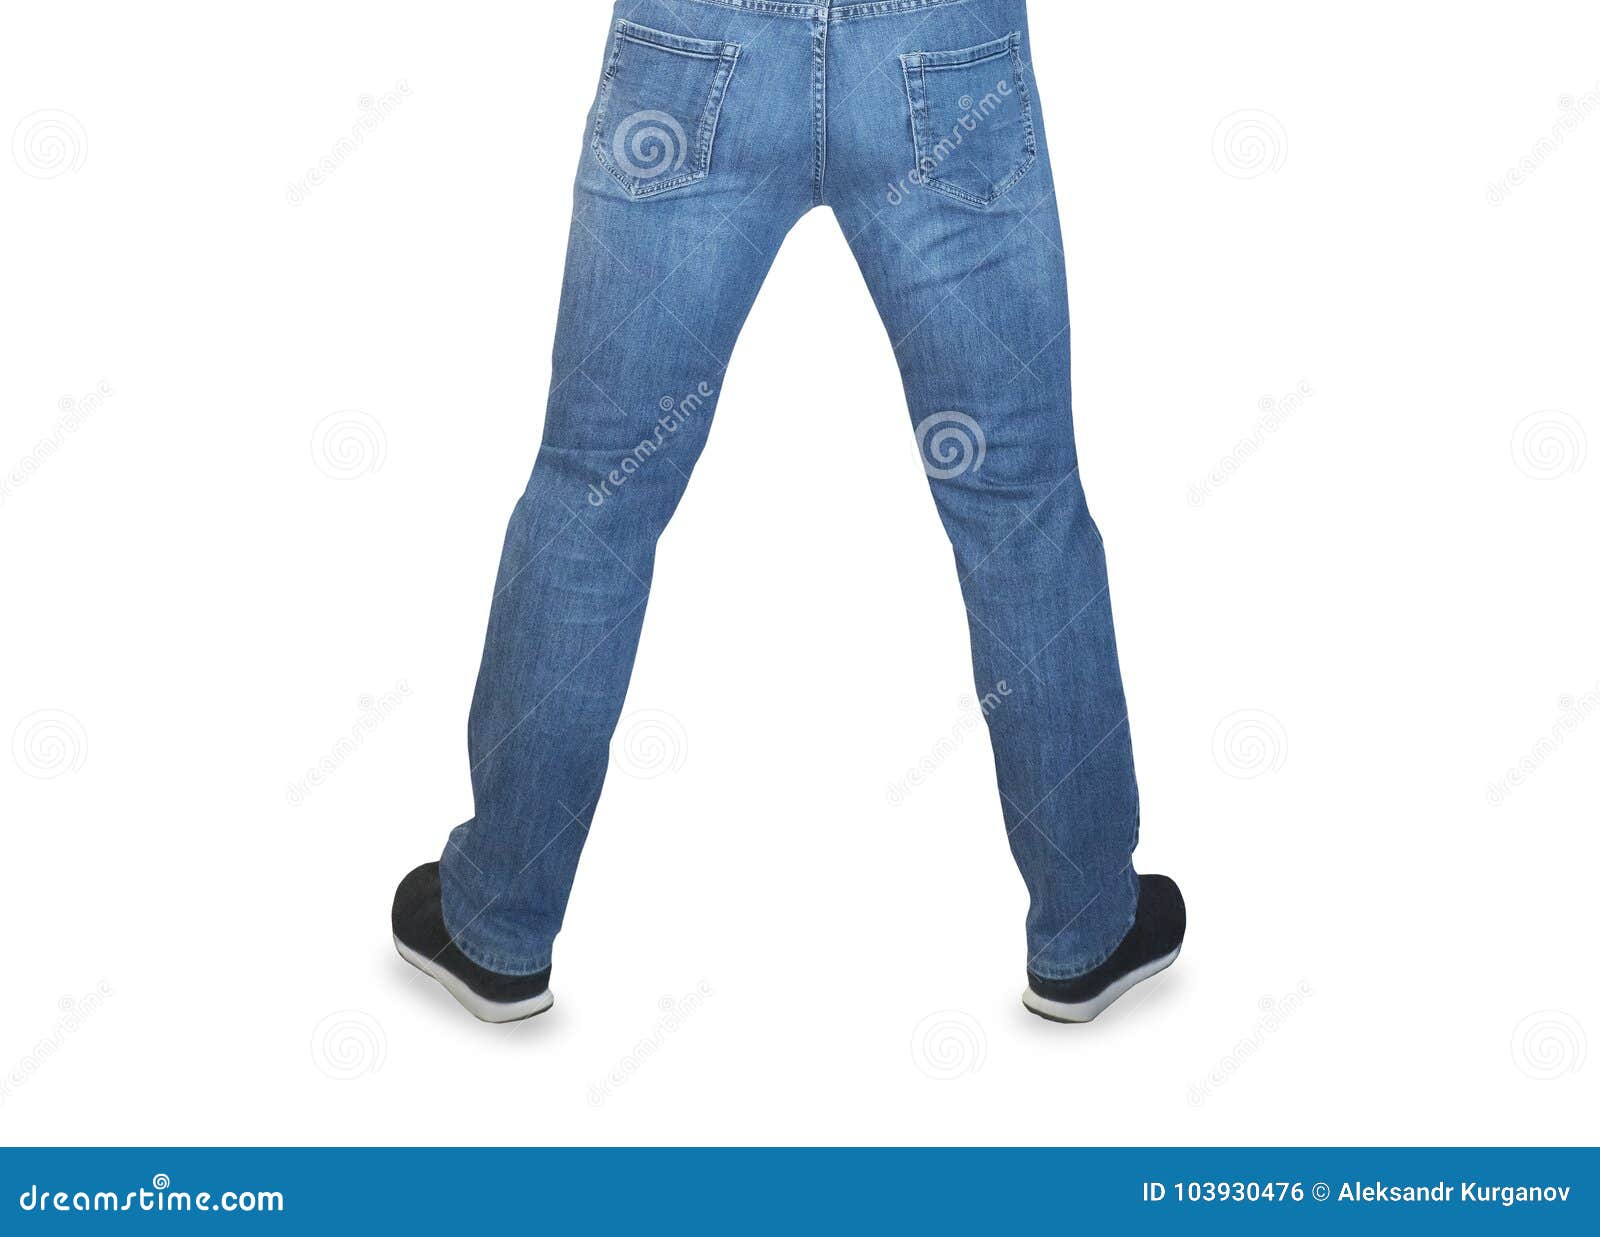 Man in jeans back view stock photo. Image of backside - 103930476